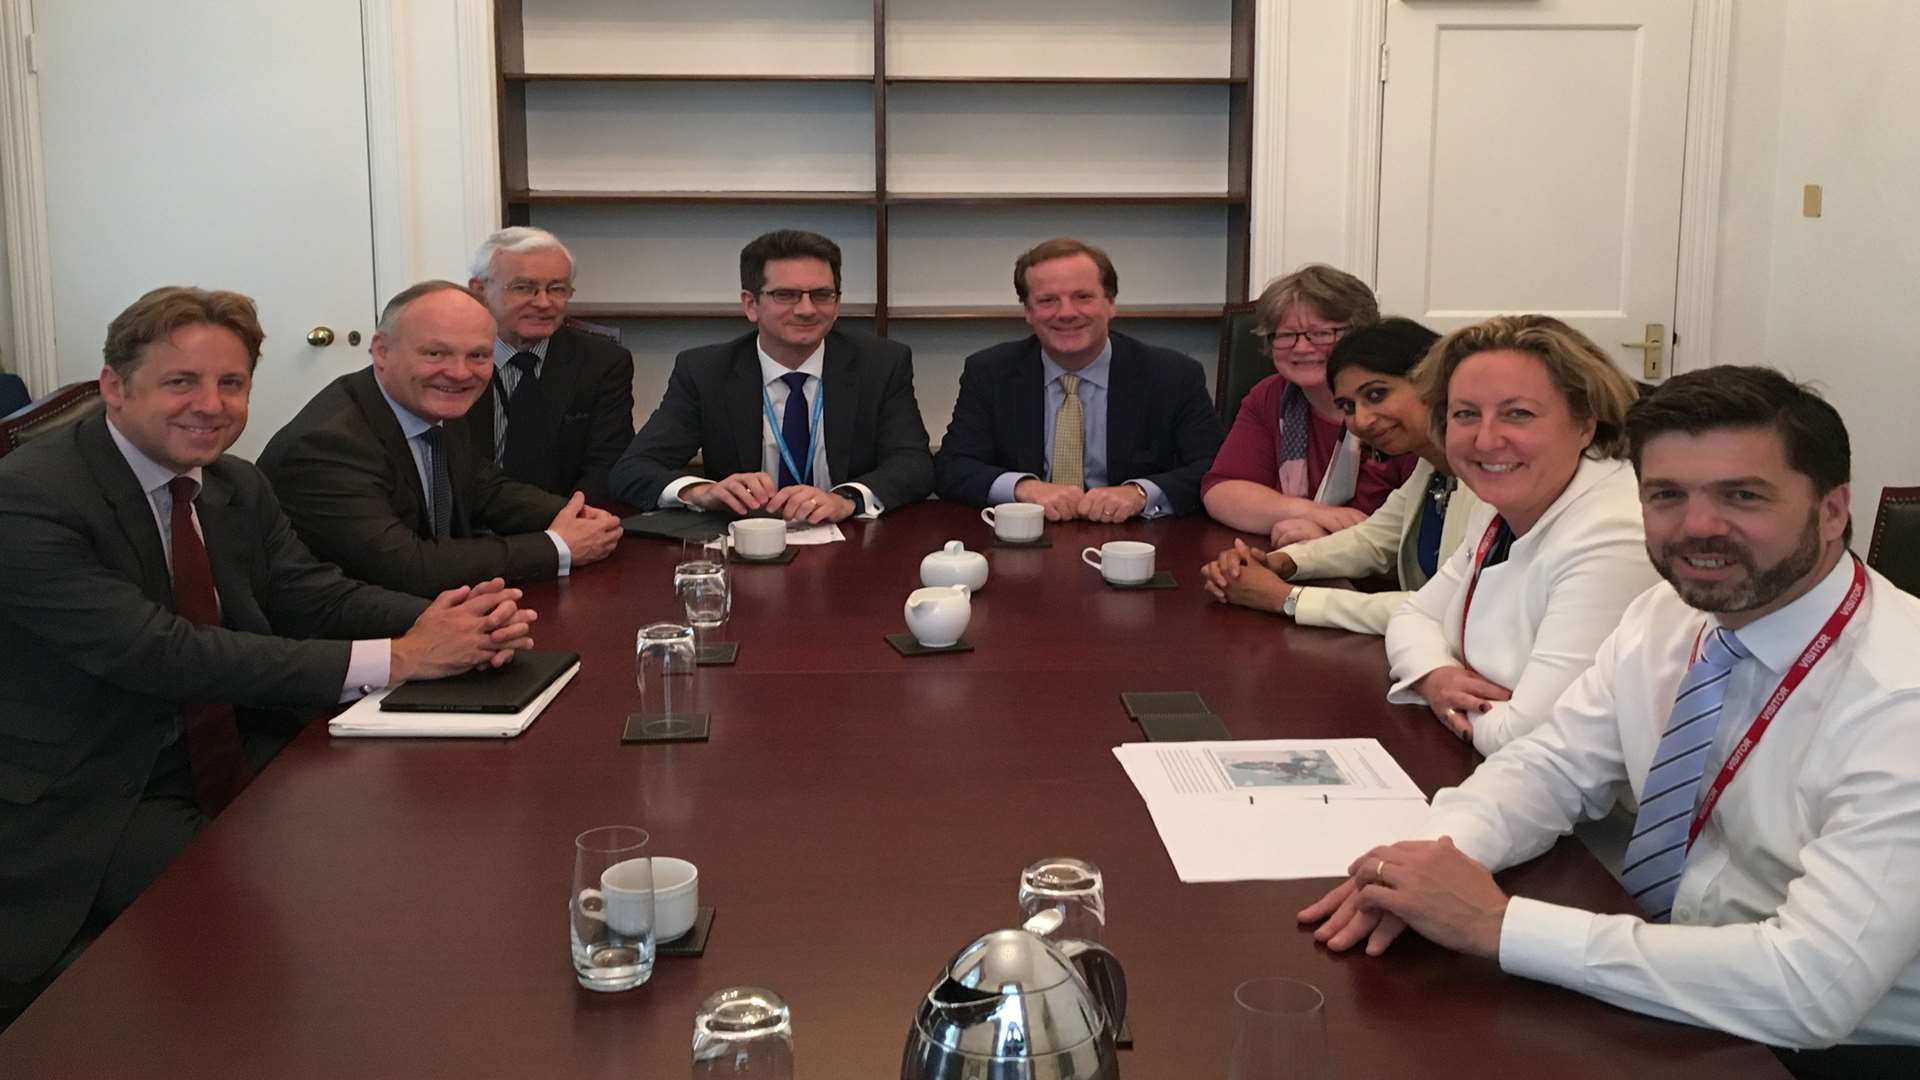 MP Charlie Elphicke next to Brexit minister Steve Baker and with Conservative colleagues